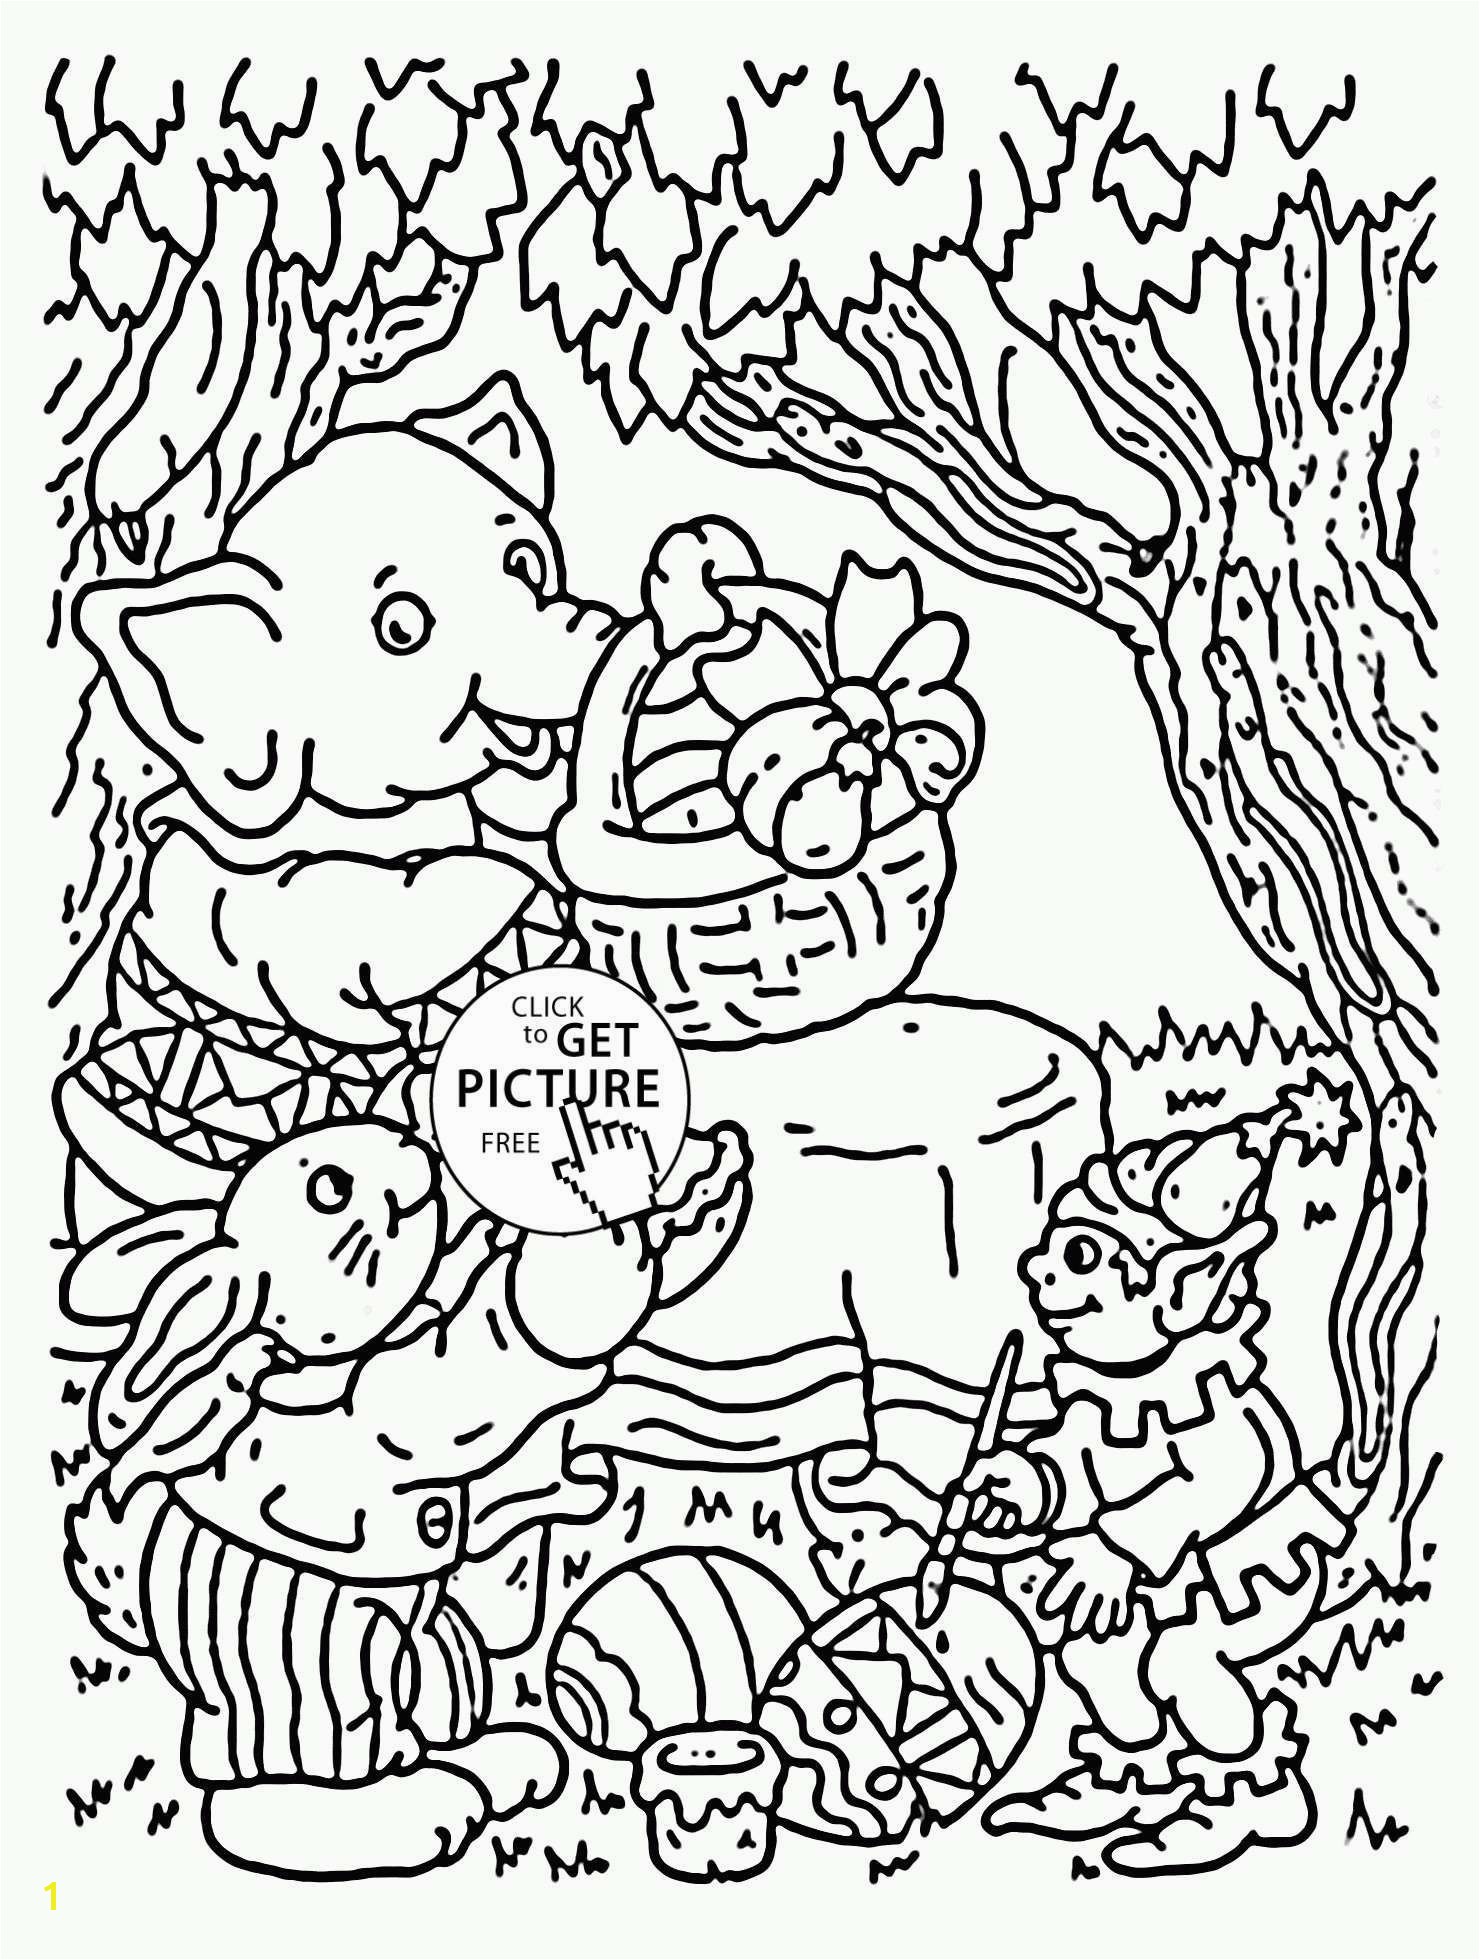 Frozen Free Coloring Pages to Print 28 Coloring Pages for Girls Frozen Olaf Free